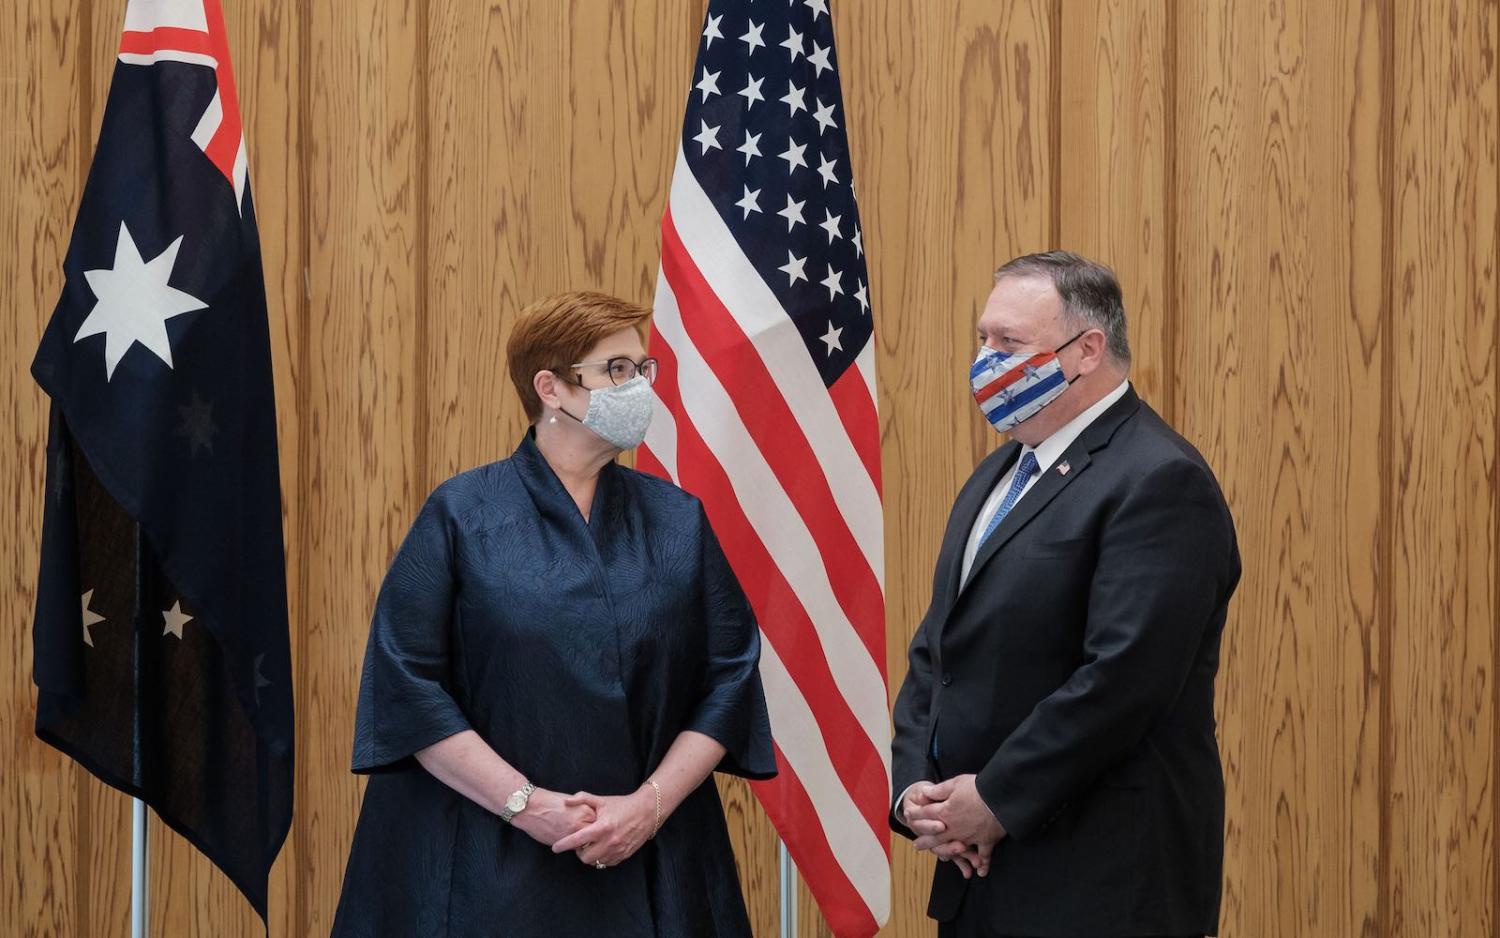 Foreign Minister Marise Payne (L) speaks with US Secretary of State Mike Pompeo during a Quad Indo-Pacific meeting in Tokyo, 6 October 2020 (Nicolas Datiche/Pool/AFP via Getty Images)